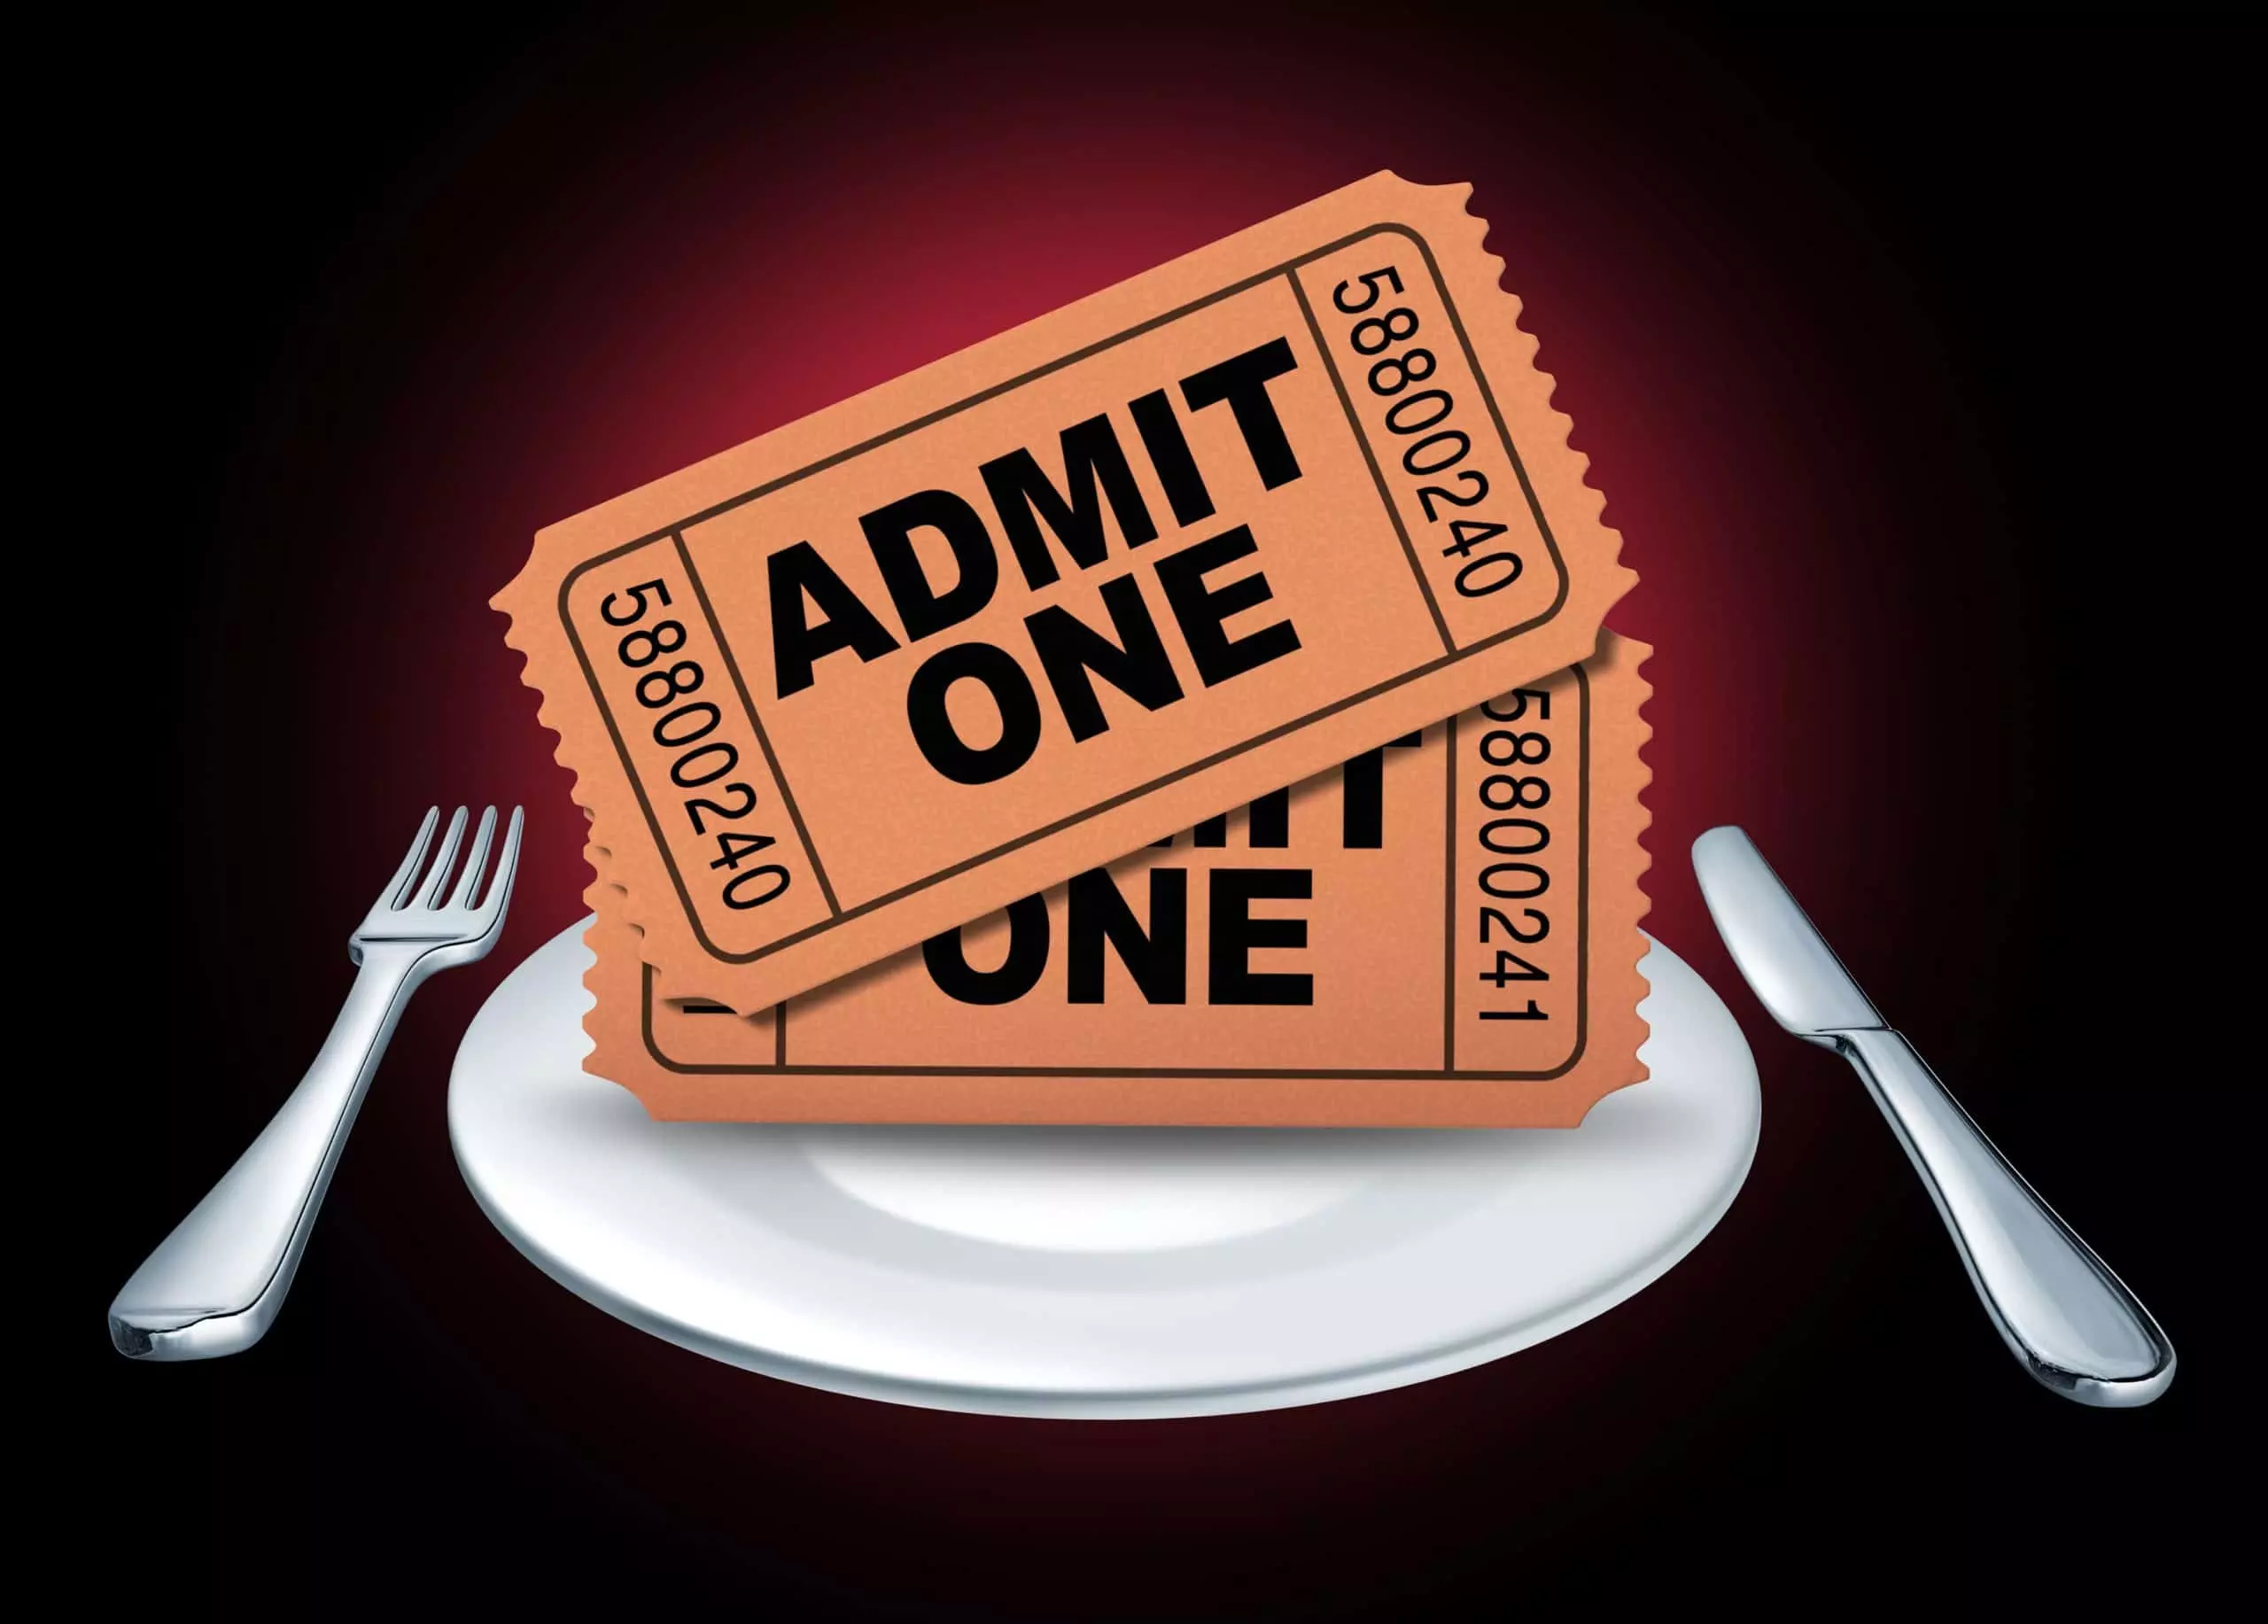 Two "Admit One" tickets on white plate